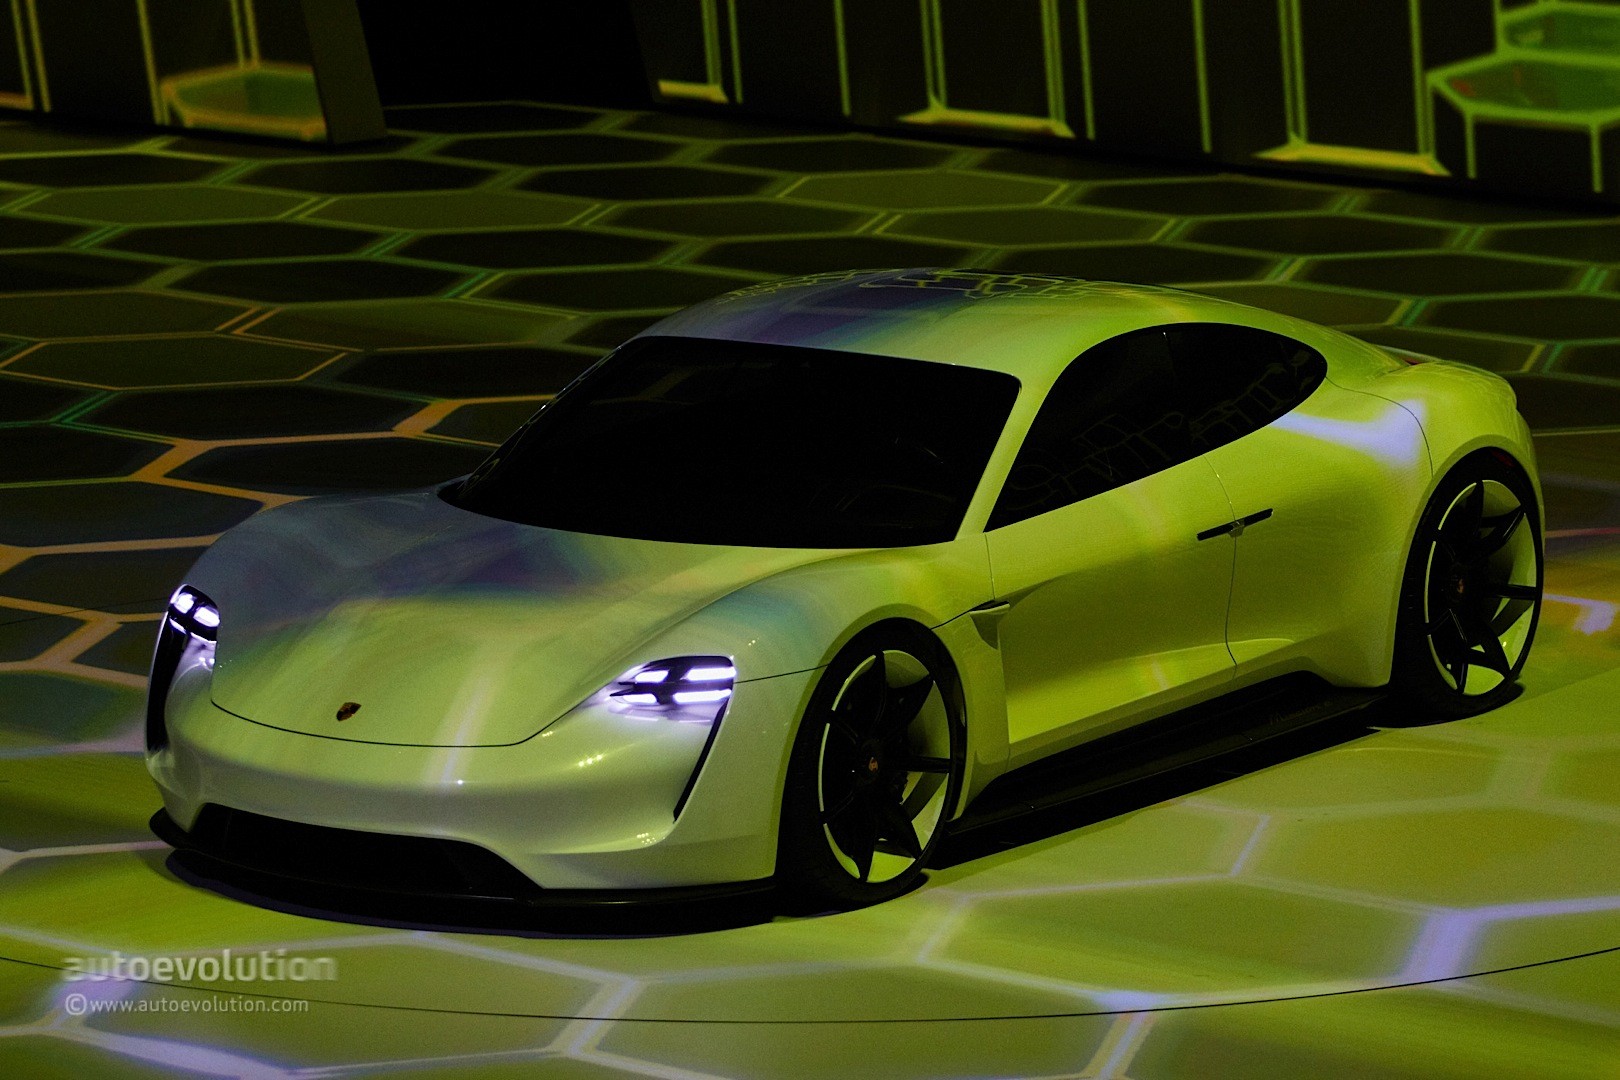 Porsche Mission E Gets Production Green Light, Coming by 2020